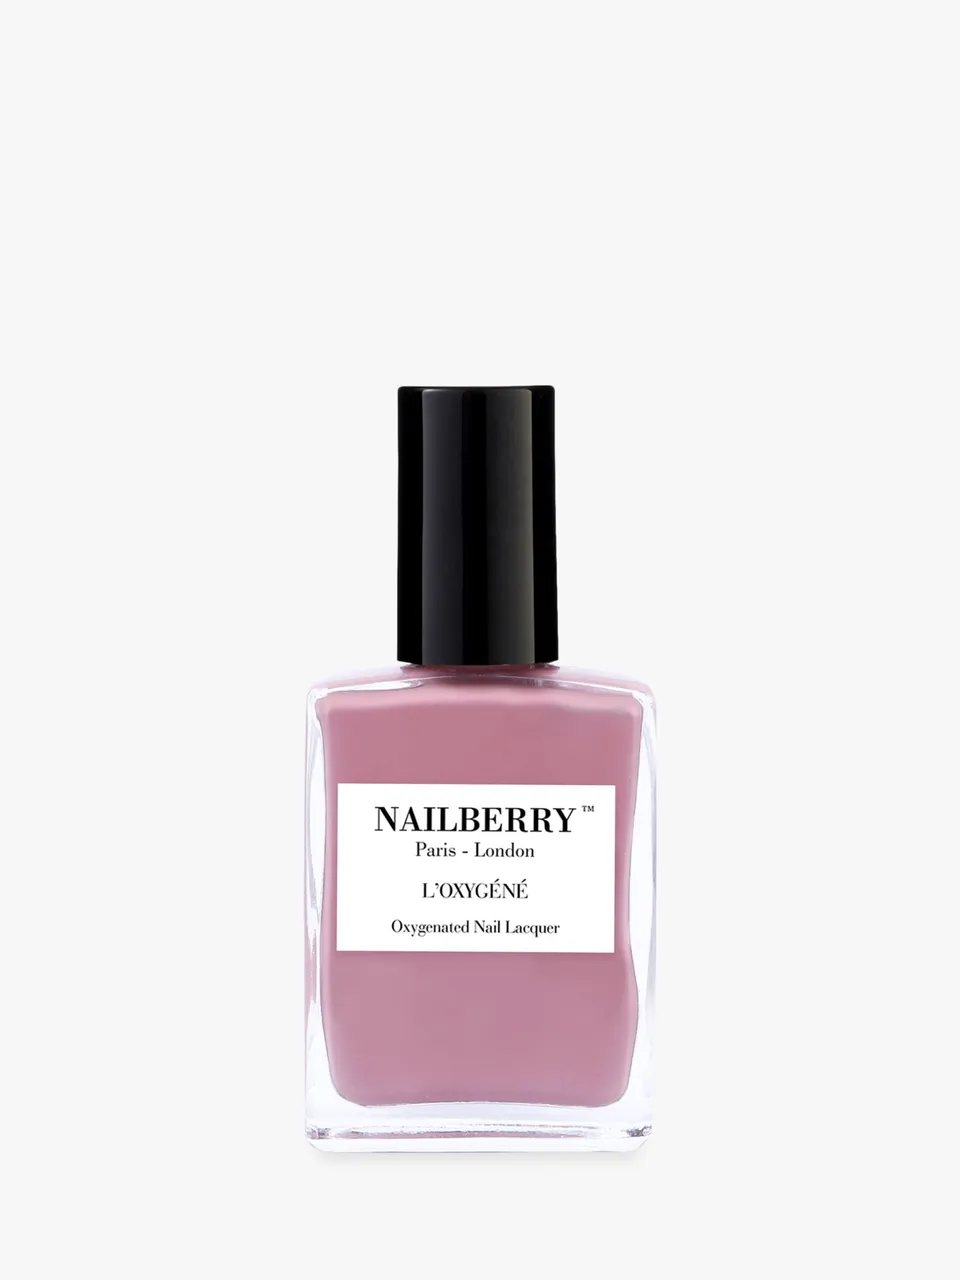 Nailberry L'OxygÃ©nÃ© Oxygenated Nail Lacquer - Love Me Tender - Unisex - Size: 15ml